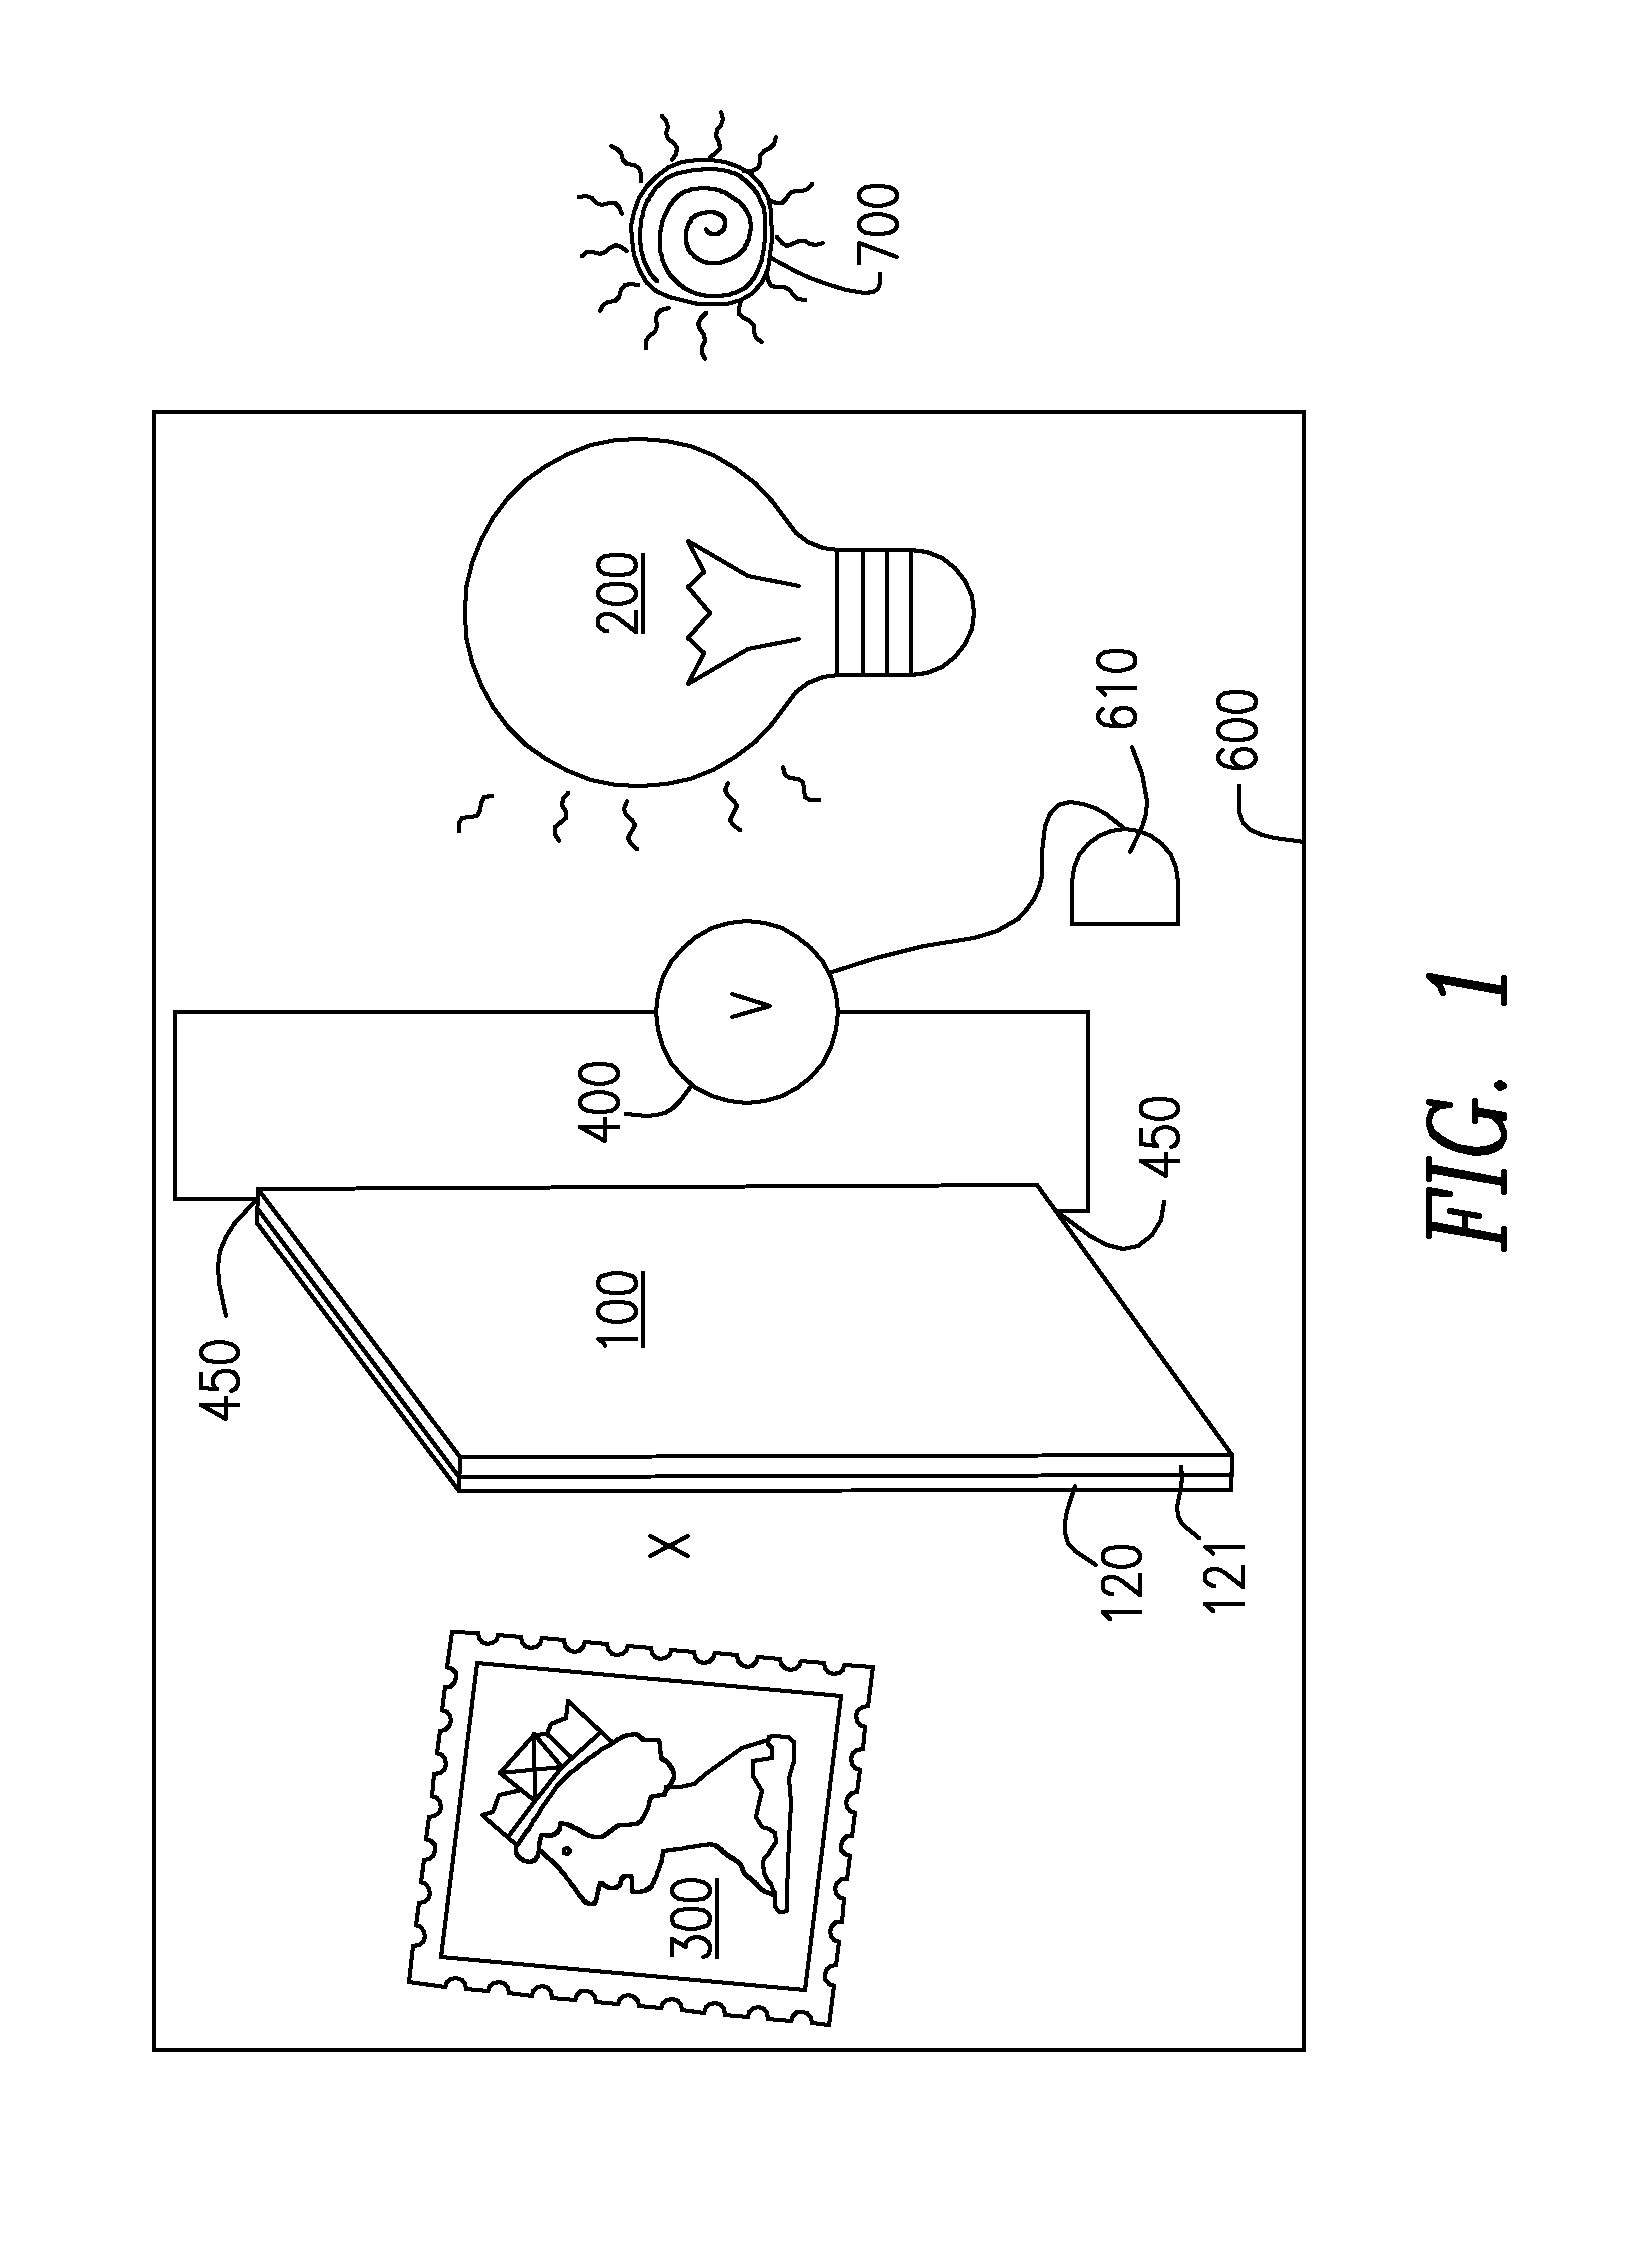 Method and device for protecting objects from degradation by light with suspended particle device light valves